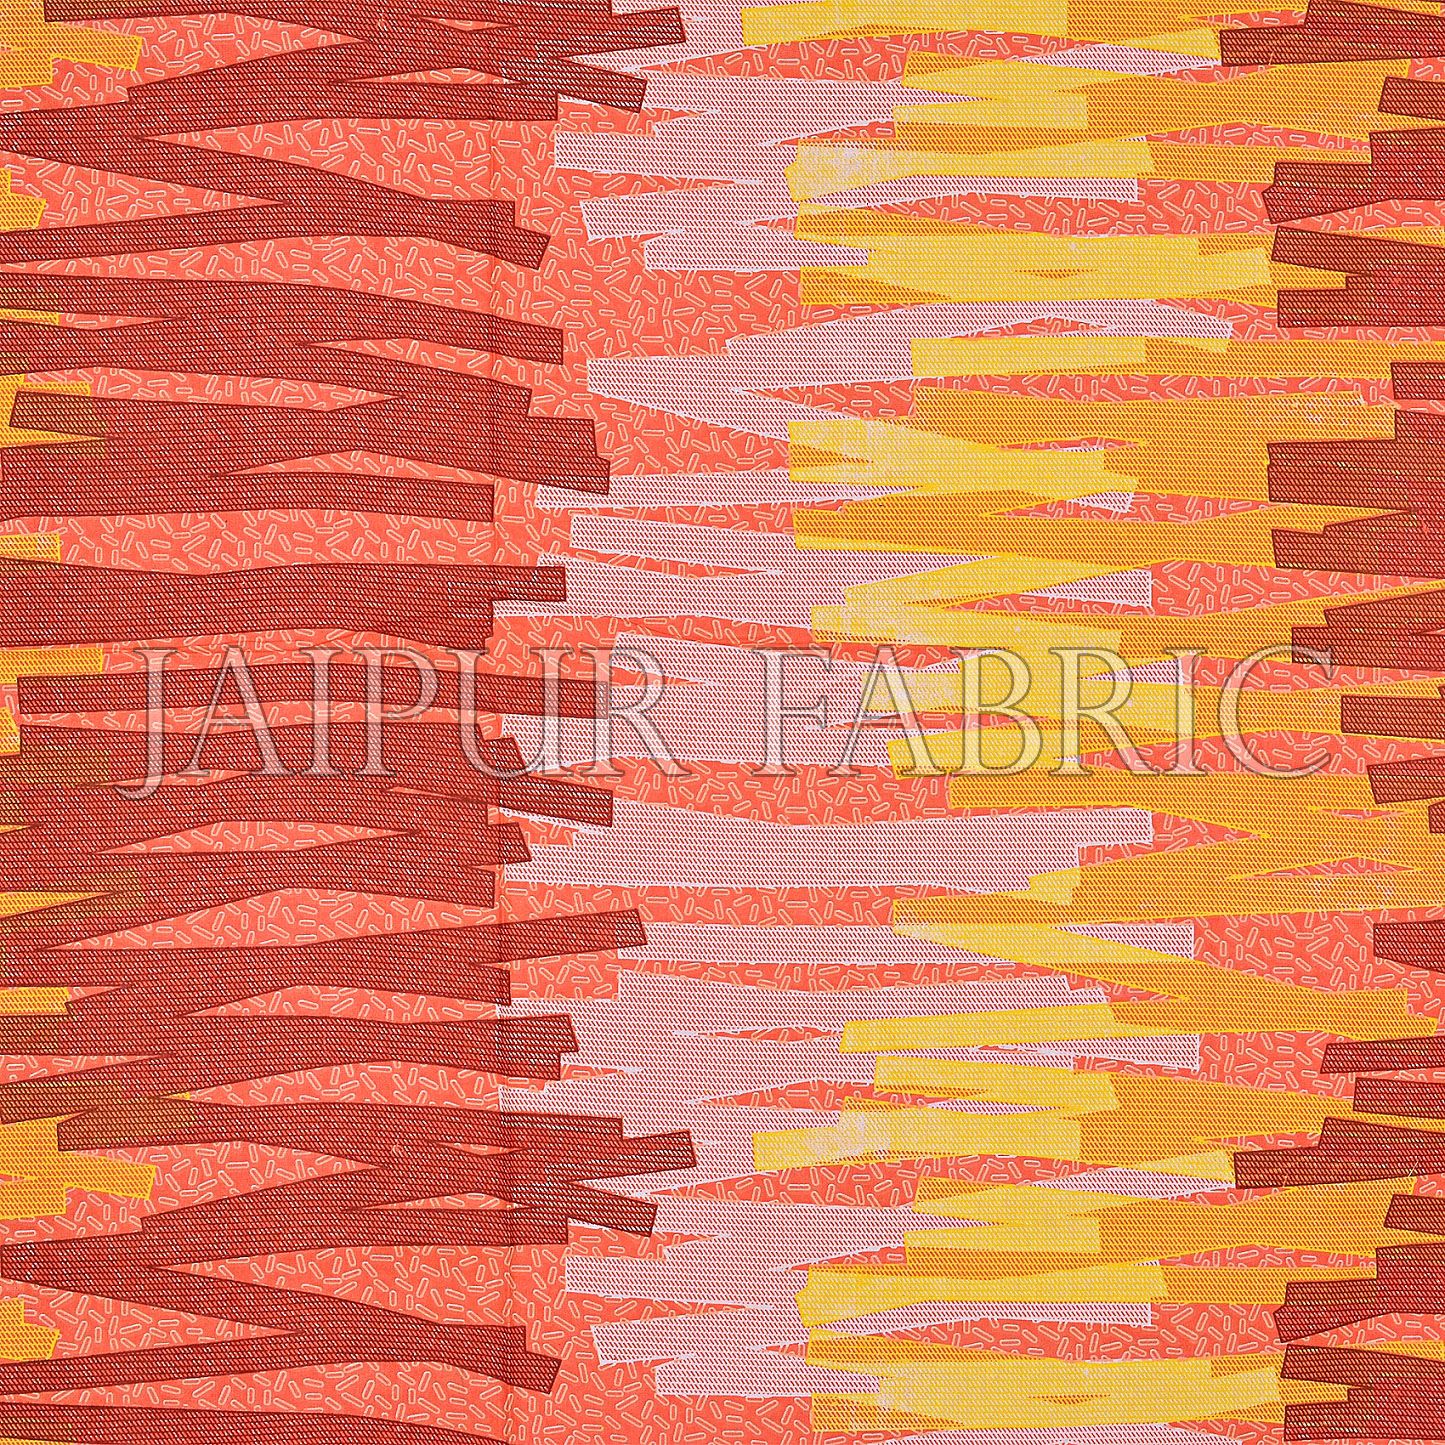 Orange Base Abstract Design Cotton Double Bed Sheet